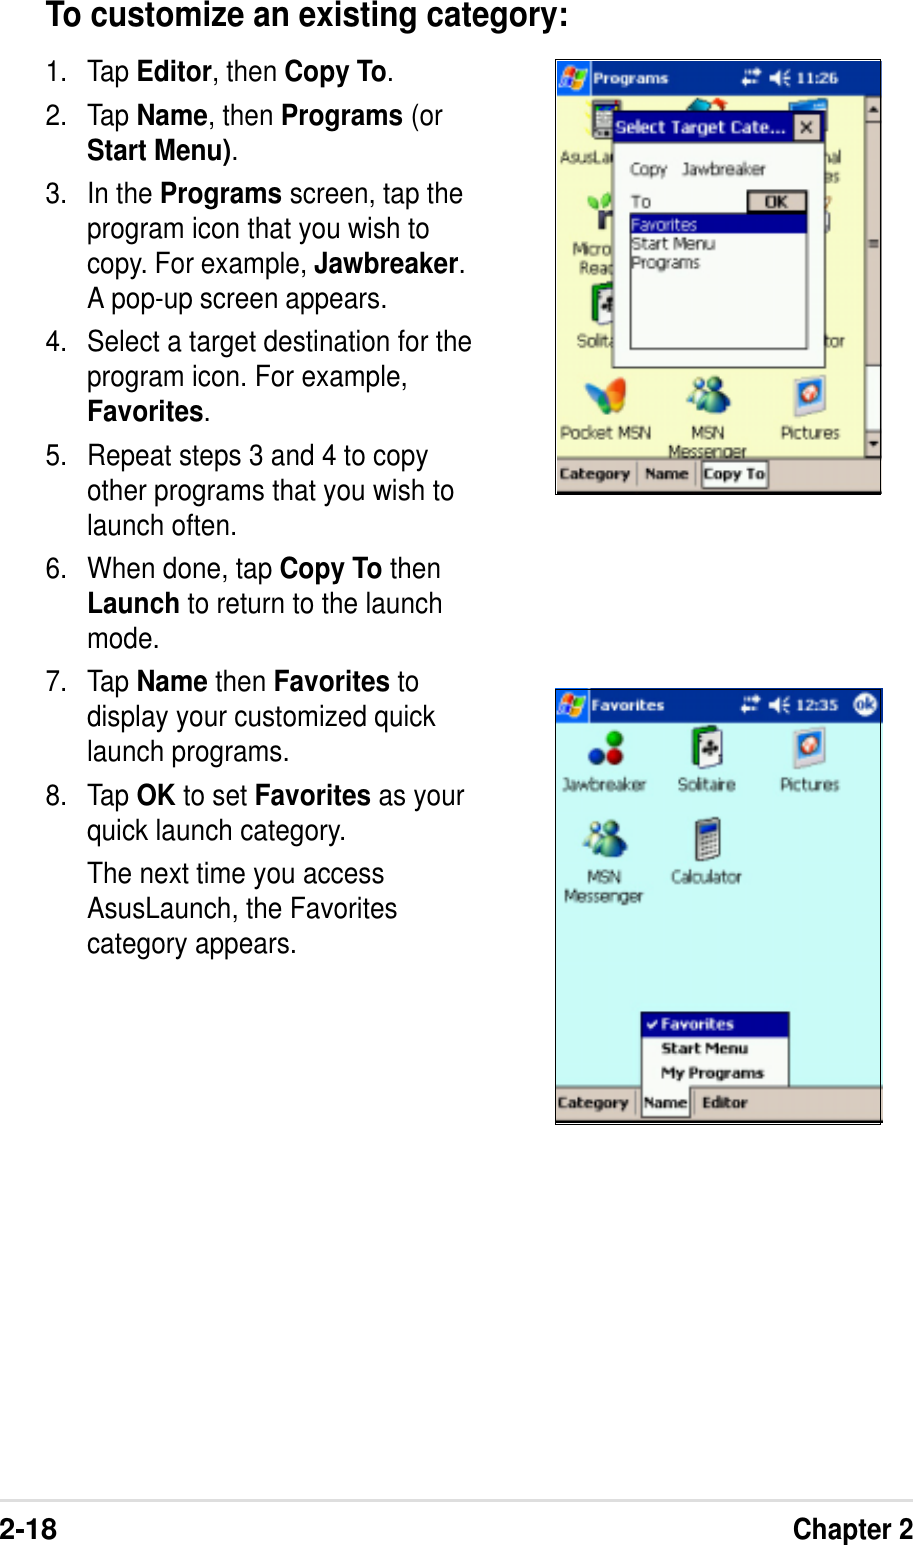 2-18Chapter 2To customize an existing category:1. Tap Editor, then Copy To.2. Tap Name, then Programs (orStart Menu).3. In the Programs screen, tap theprogram icon that you wish tocopy. For example, Jawbreaker.A pop-up screen appears.4. Select a target destination for theprogram icon. For example,Favorites.5. Repeat steps 3 and 4 to copyother programs that you wish tolaunch often.6. When done, tap Copy To thenLaunch to return to the launchmode.7. Tap Name then Favorites todisplay your customized quicklaunch programs.8. Tap OK to set Favorites as yourquick launch category.The next time you accessAsusLaunch, the Favoritescategory appears.